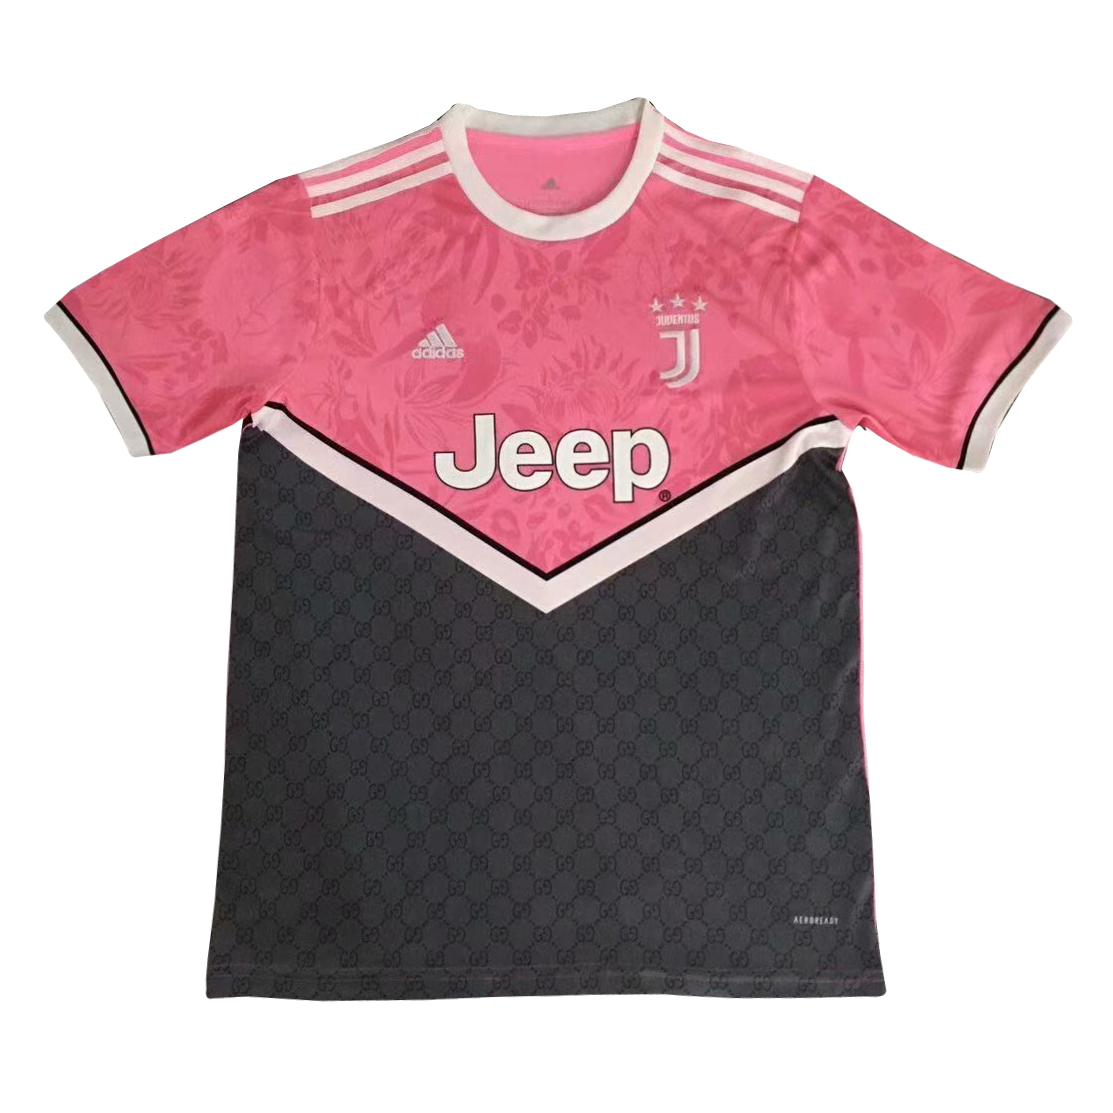 US$ 15.80 - Mens Juventus x Gucci Special Edition Jesery ...